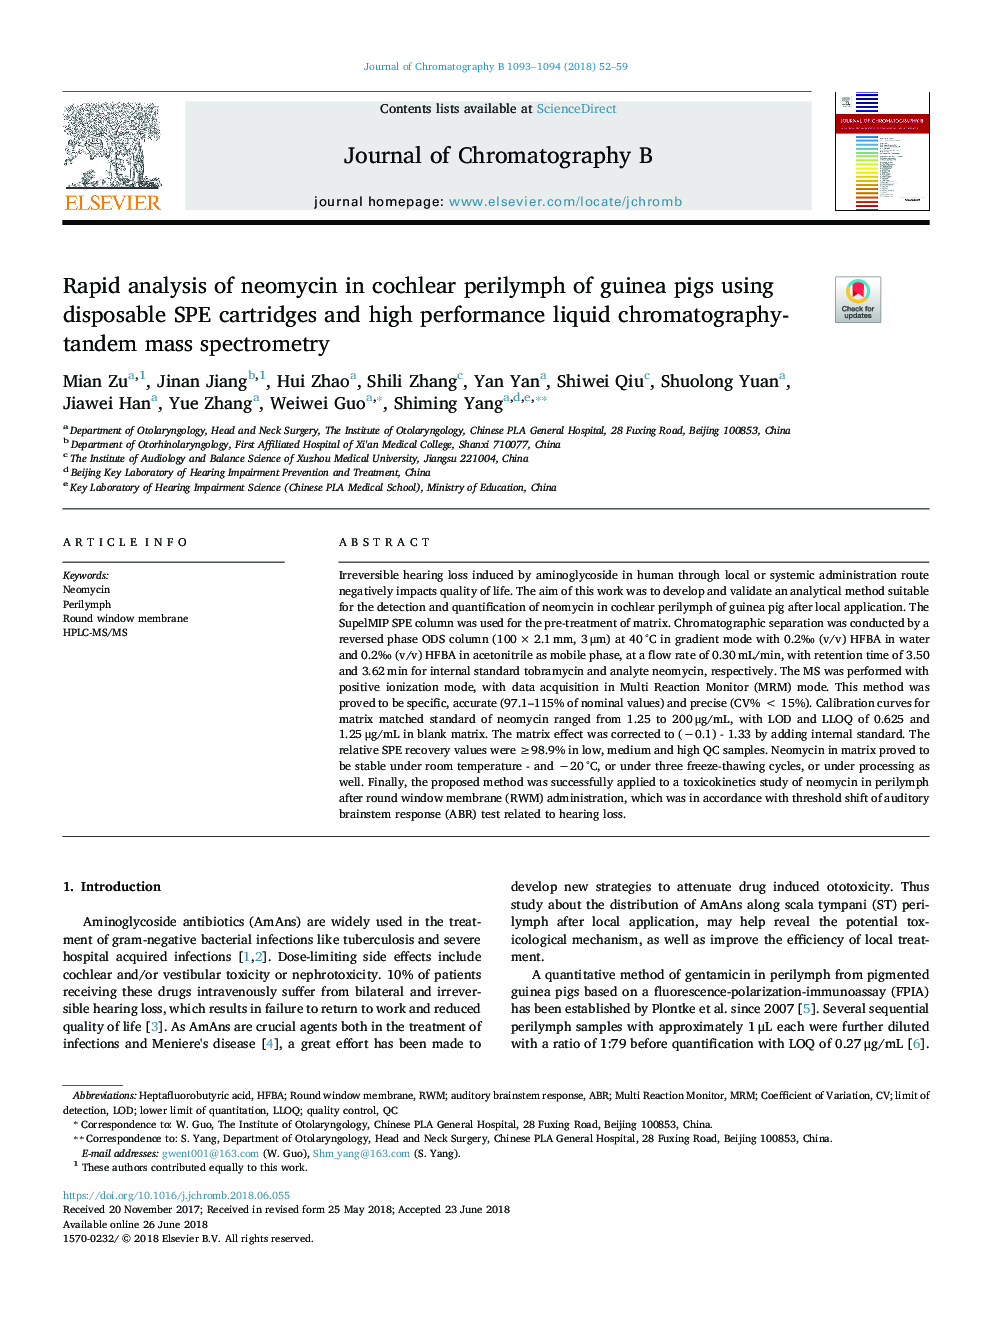 Rapid analysis of neomycin in cochlear perilymph of guinea pigs using disposable SPE cartridges and high performance liquid chromatography-tandem mass spectrometry